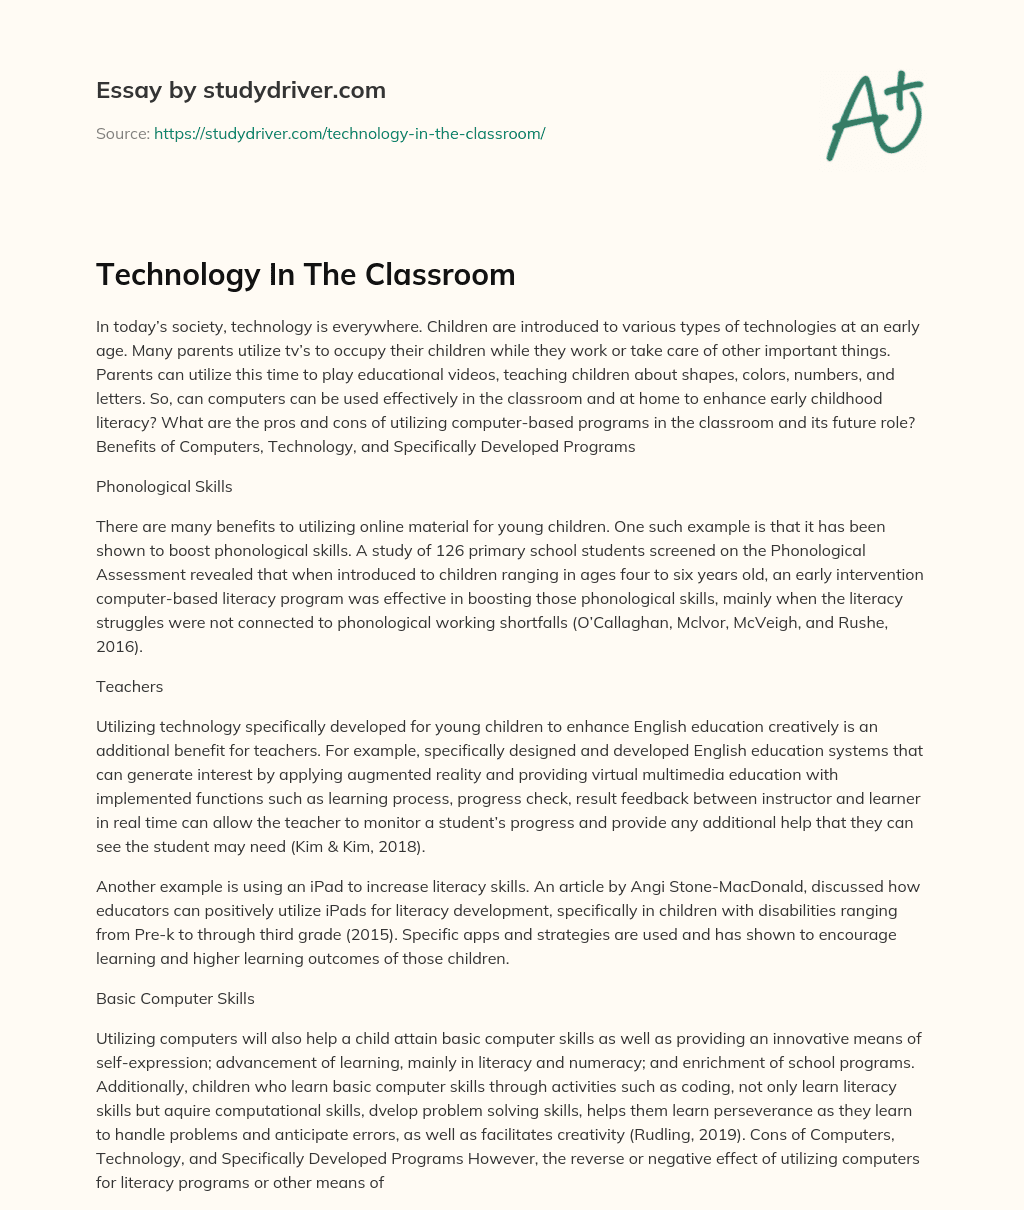 Technology in the Classroom essay